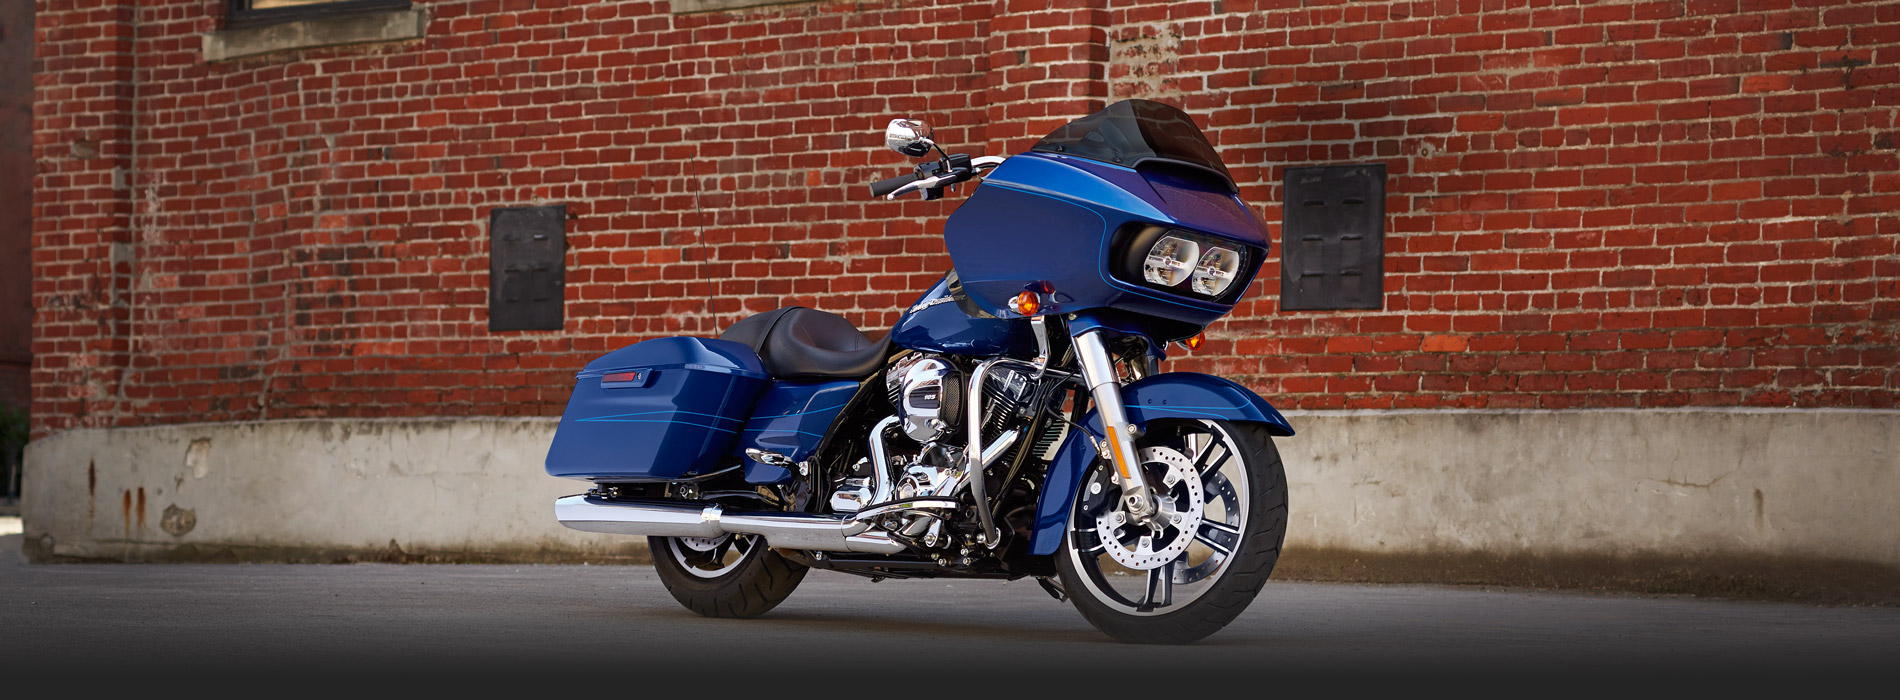 Harley-Davidson Road Glide Backgrounds, Compatible - PC, Mobile, Gadgets| 1900x700 px